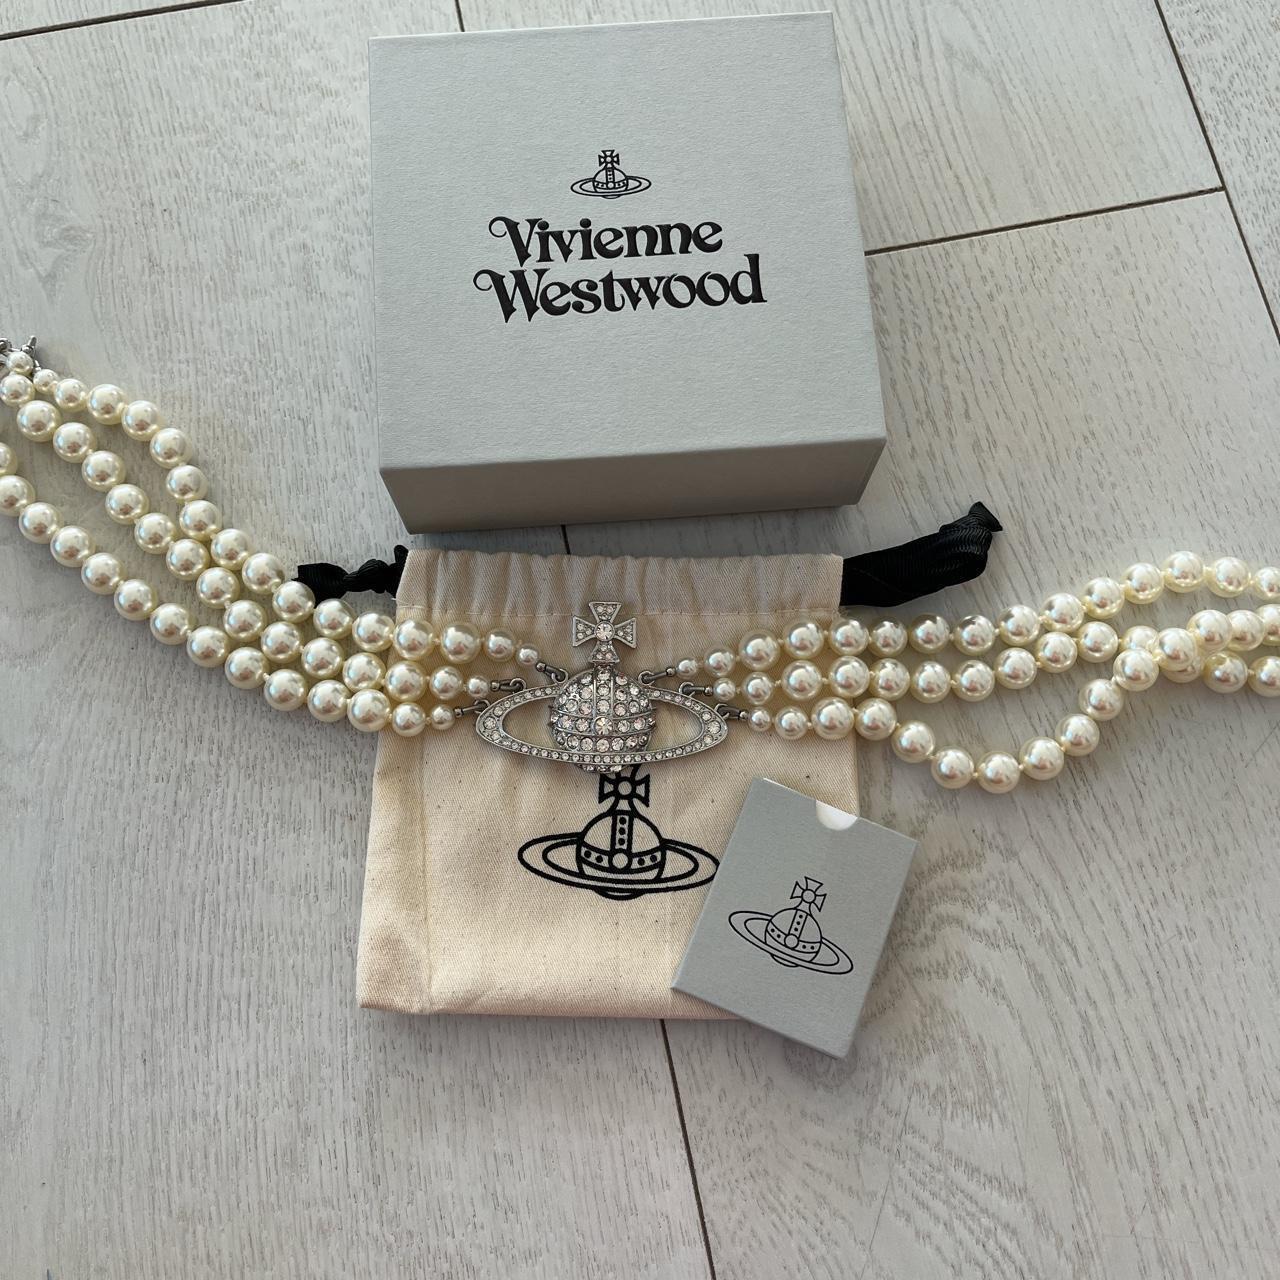 Vivienne Westwood Triple Pearls Brand new come with... - Depop